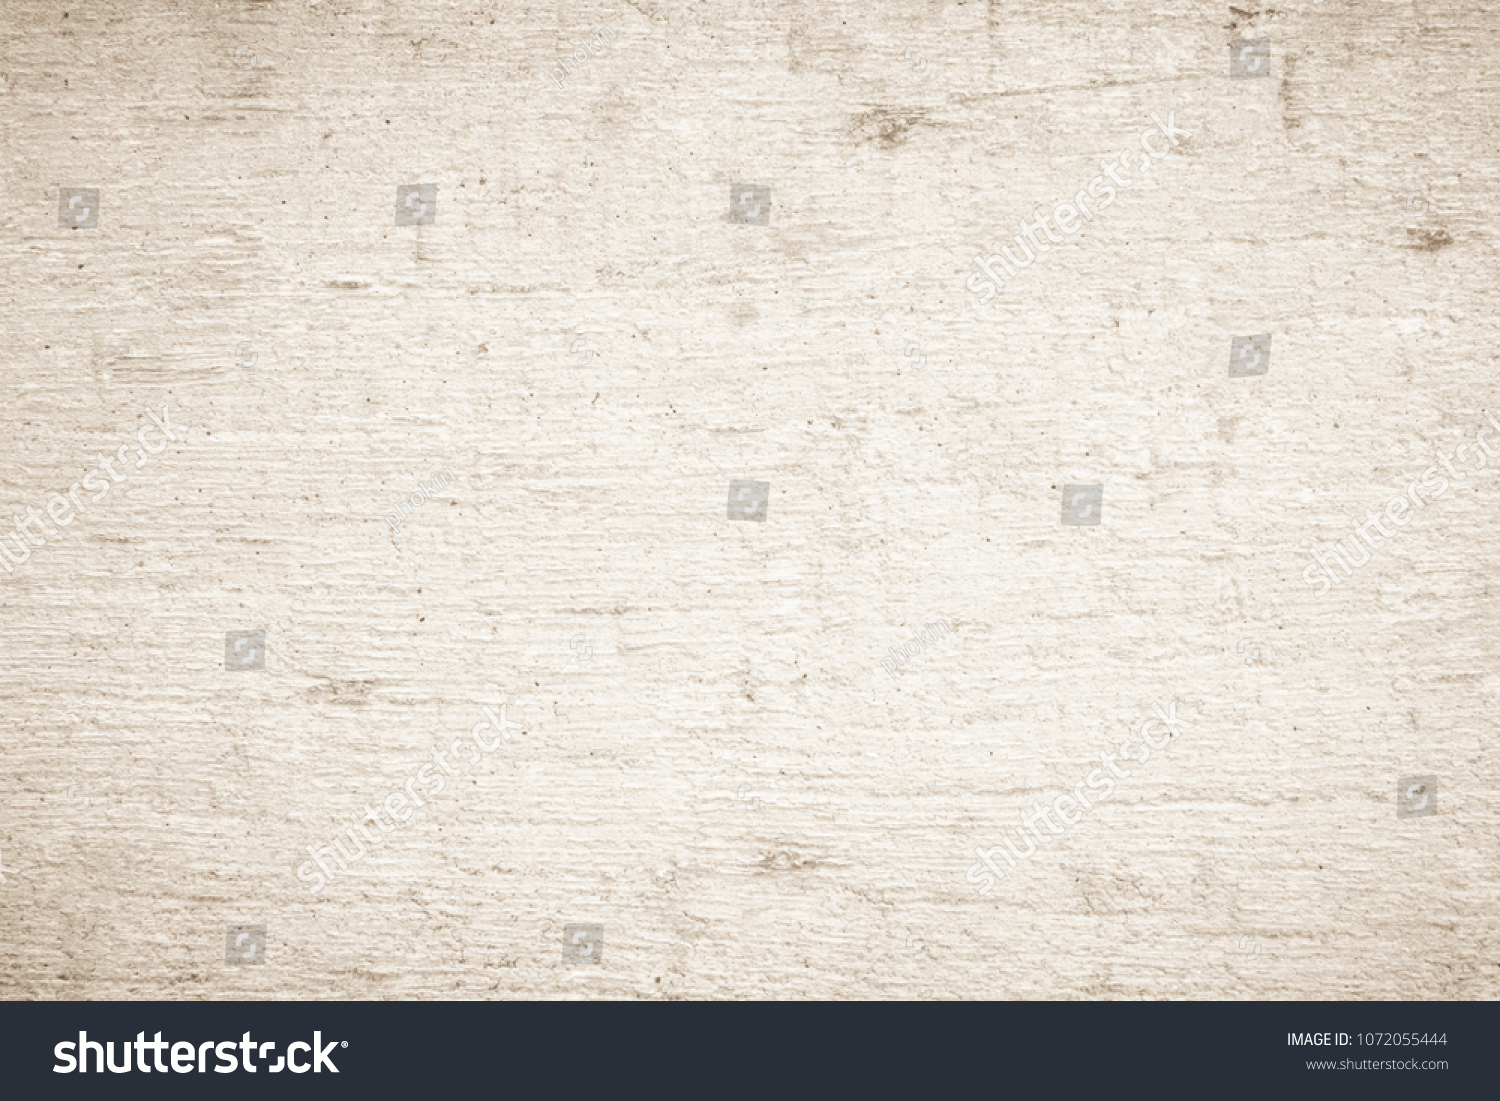 Art cream concrete texture for background in black. Brown color dry scratched surface wall cover sand art abstract colorful relief scratches shabby vintage concrete grey detail stone covering. #1072055444